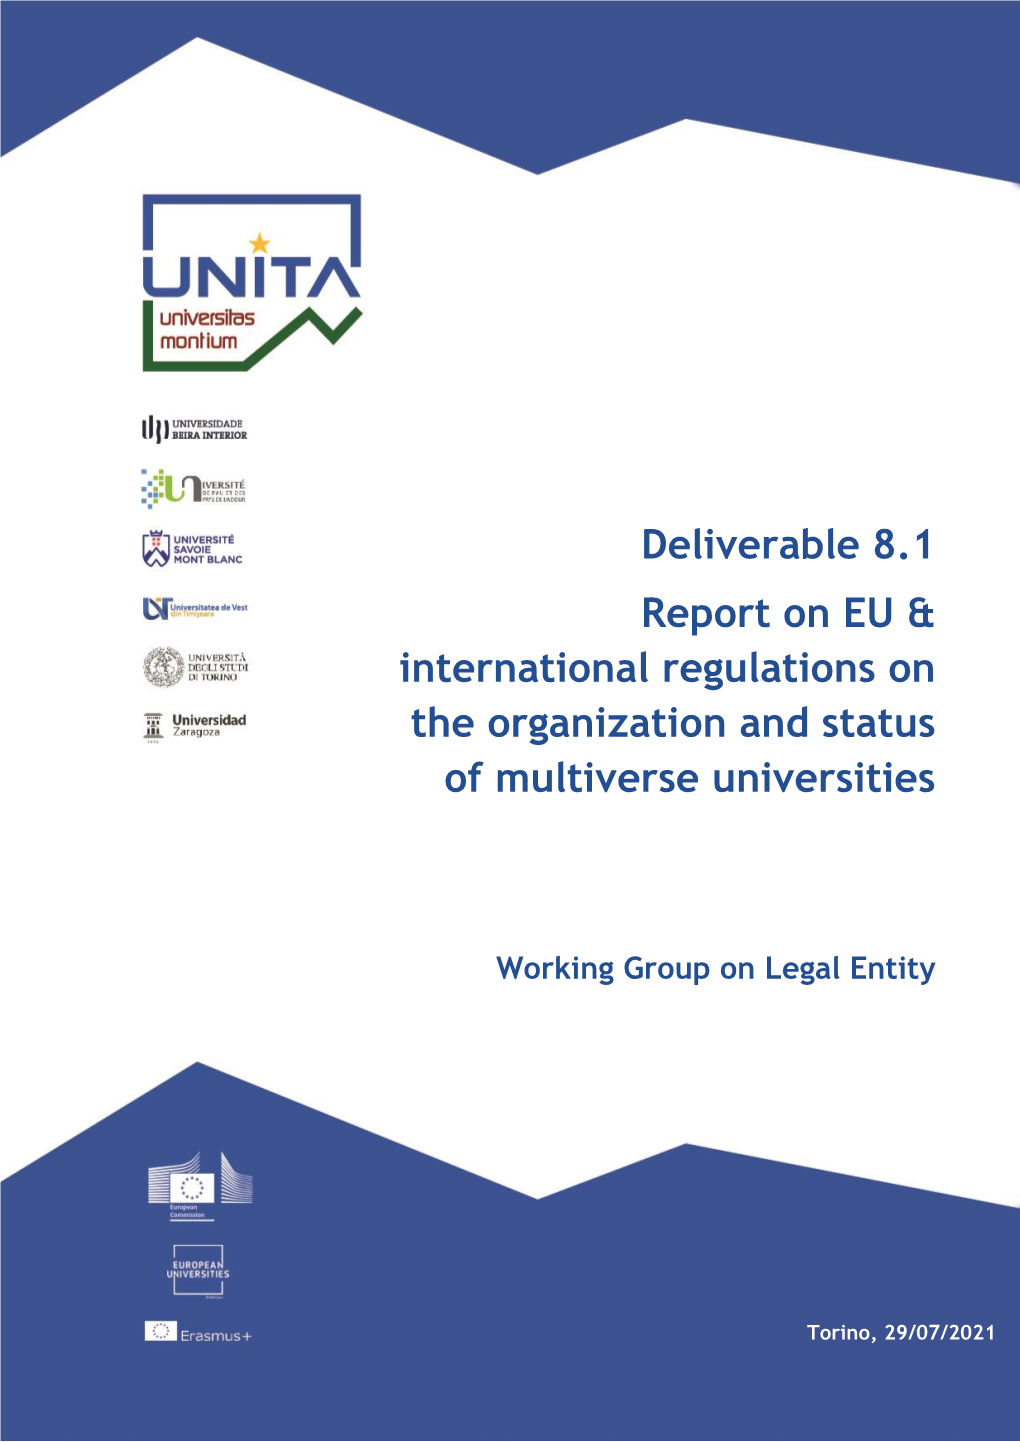 Deliverable 8.1 Report on EU & International Regulations on the Organization and Status of Multiverse Universities